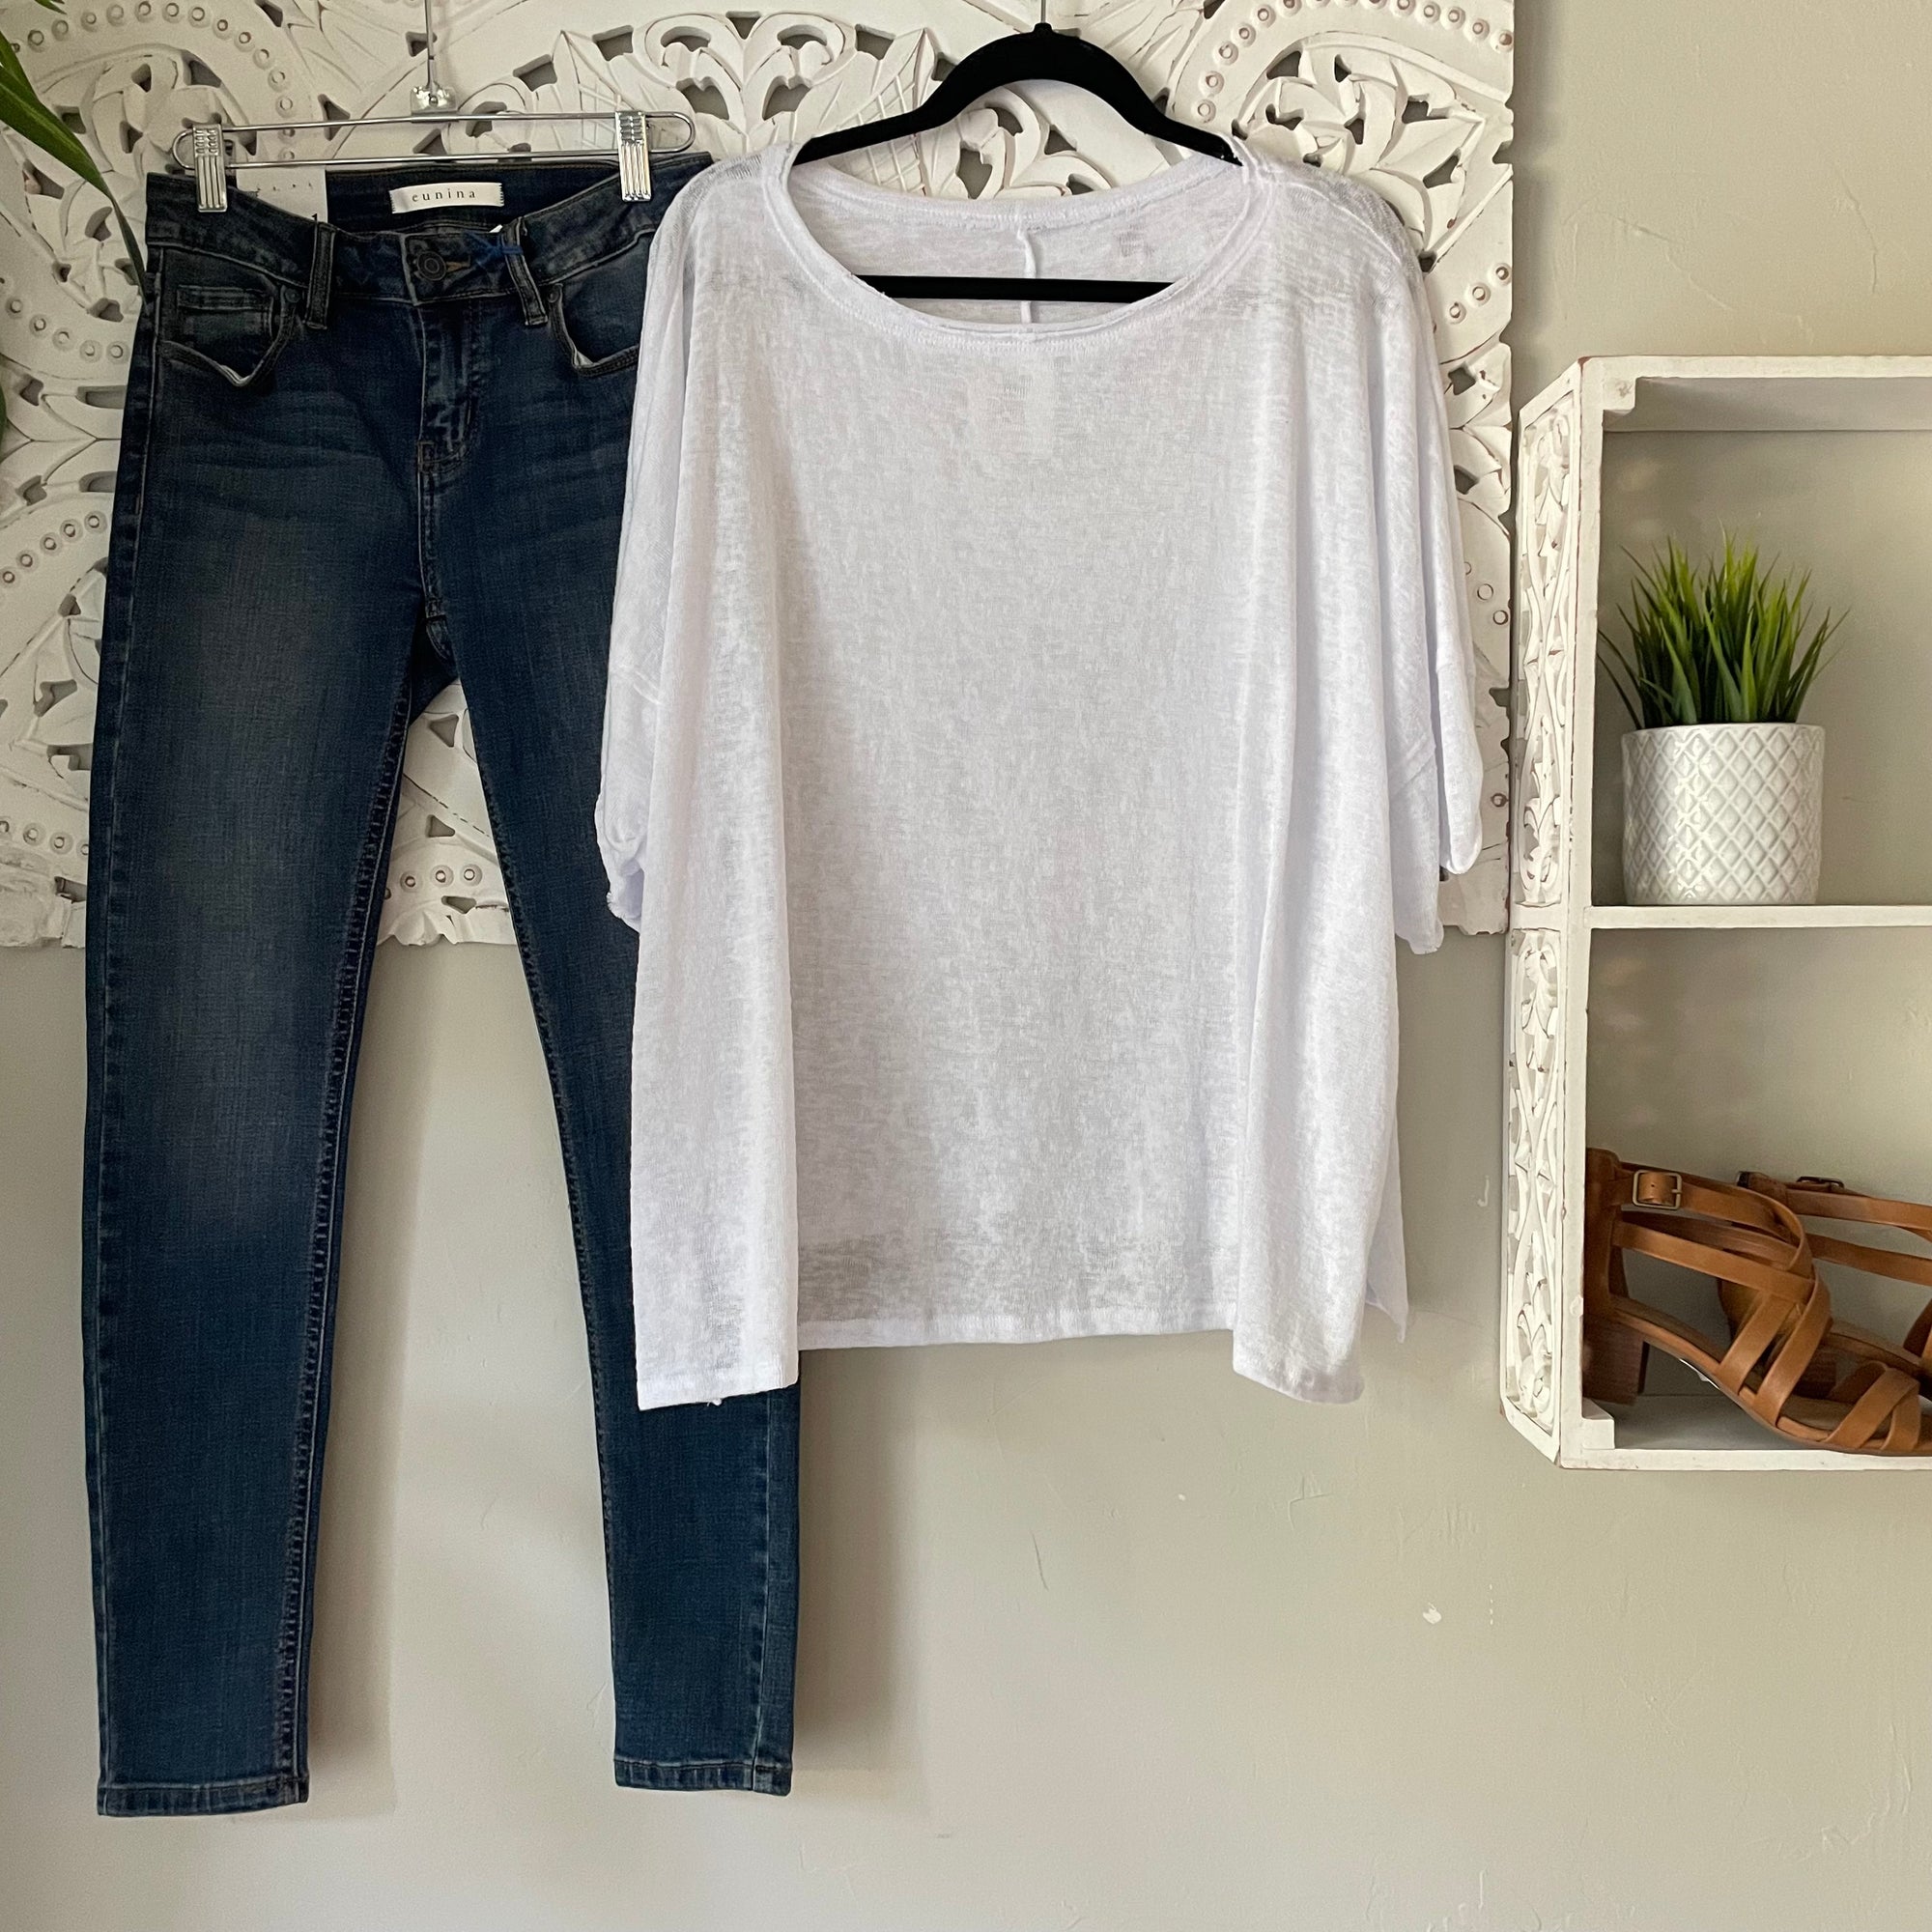 Light Knit Top in White